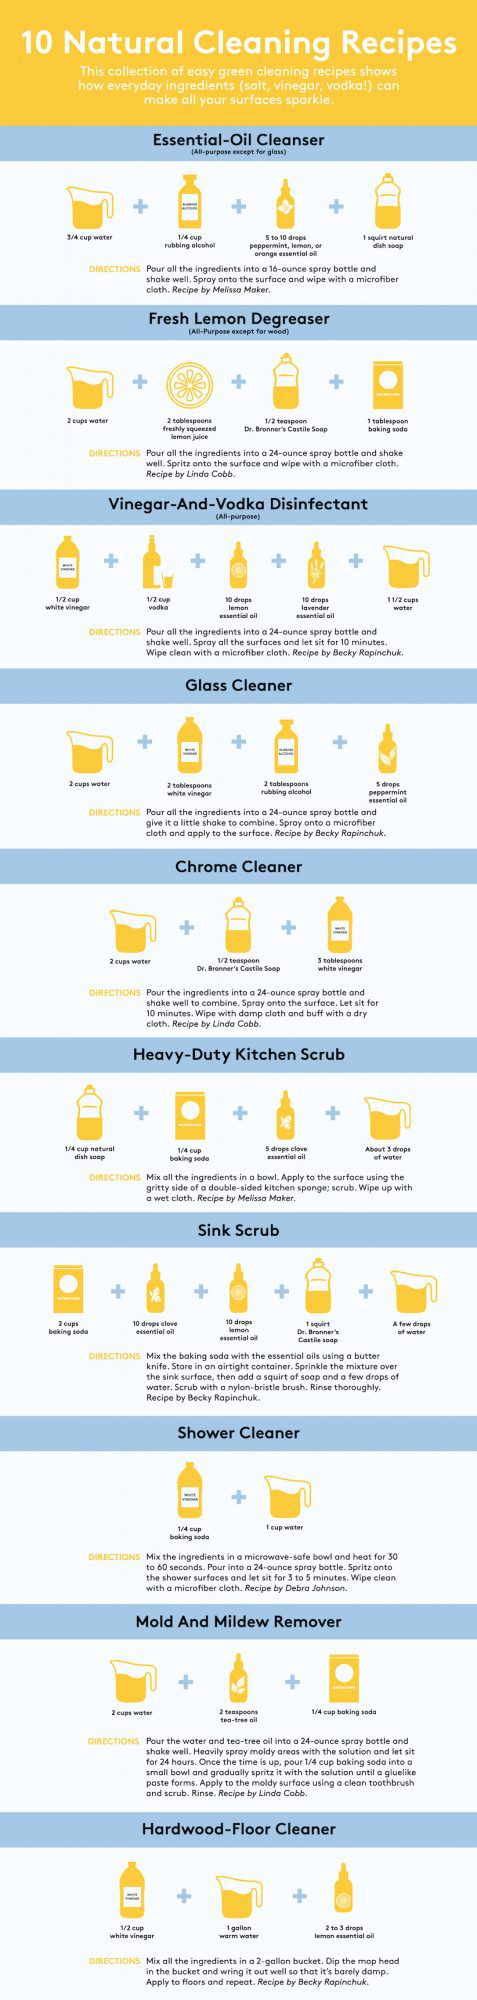 DIY Organic Cleaners: Safe and Effective Recipes